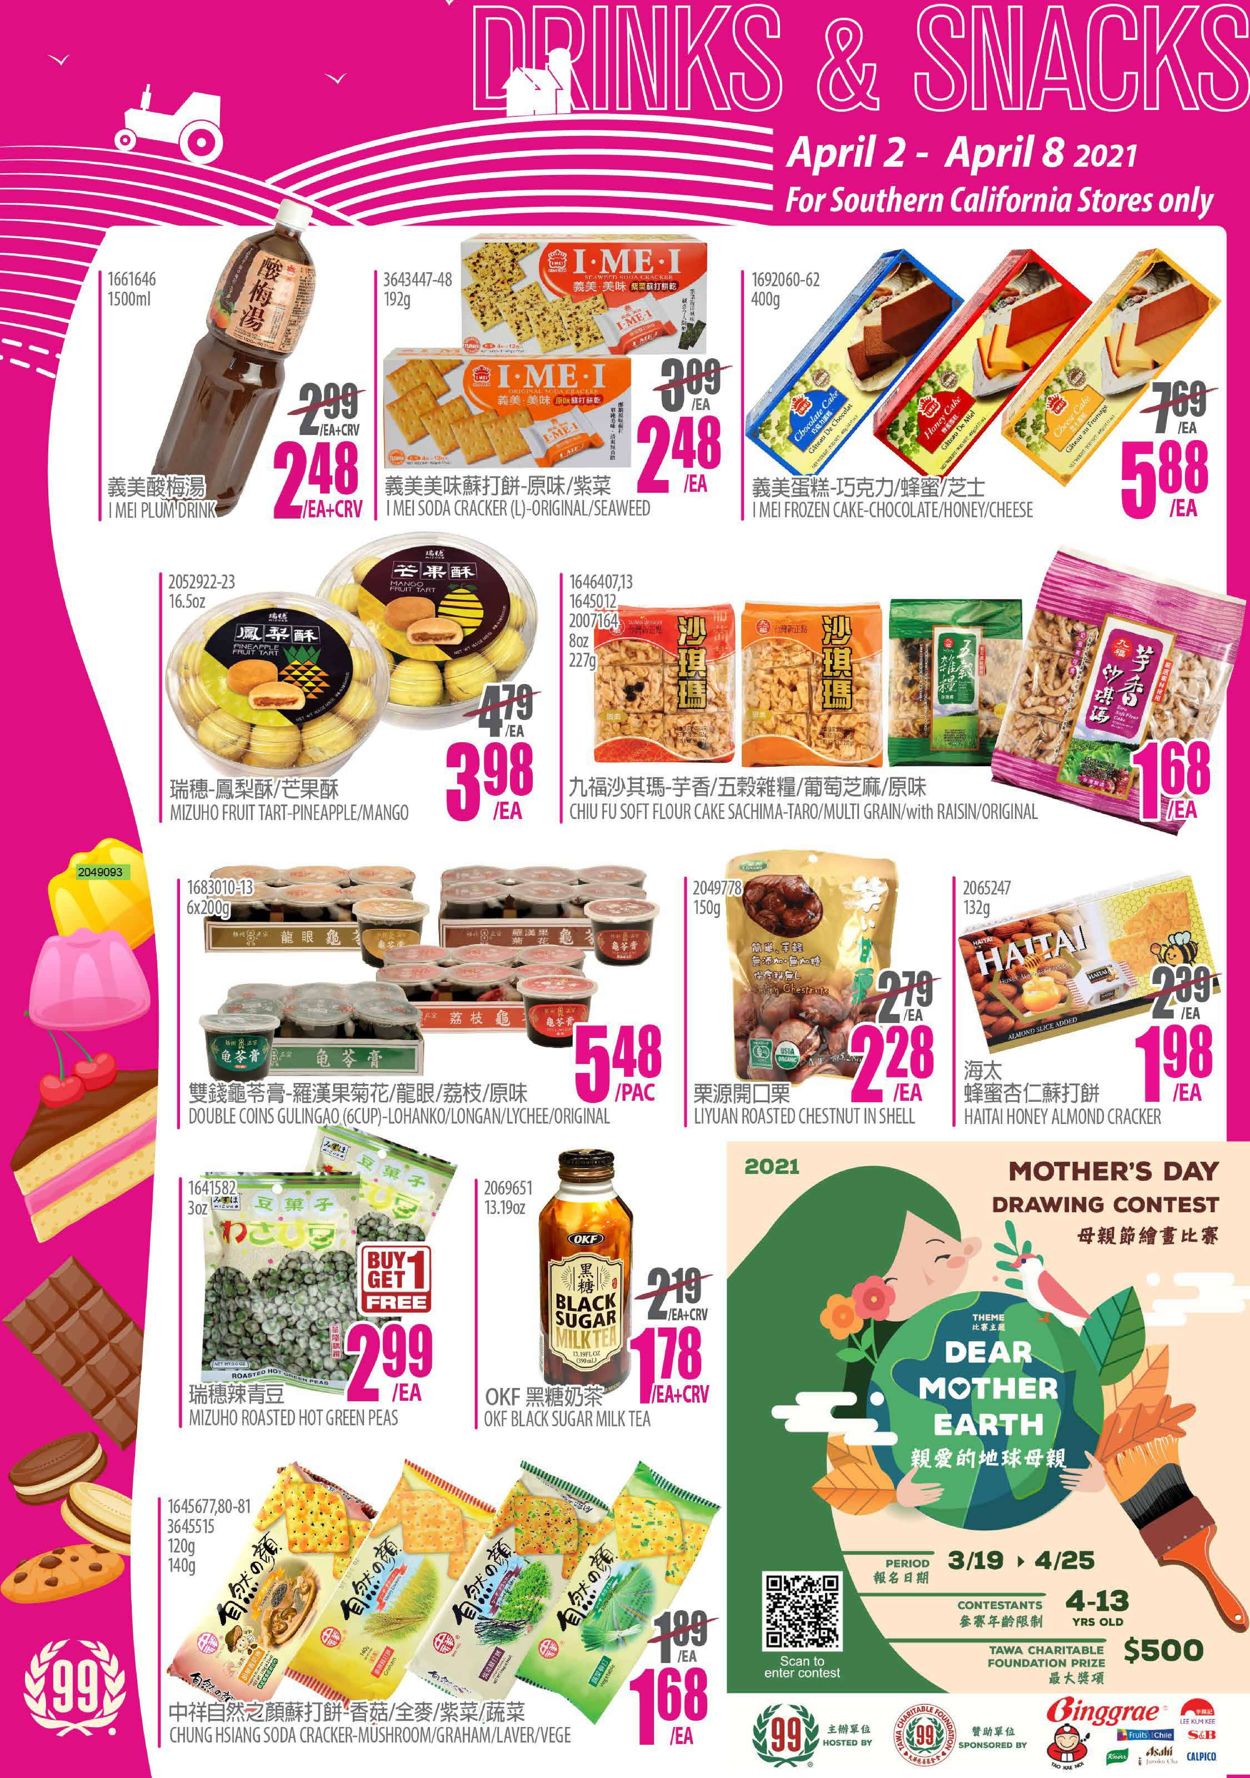 99 Ranch - Easter 2021 Ad Current weekly ad 04/02 - 04/08/2021 [6